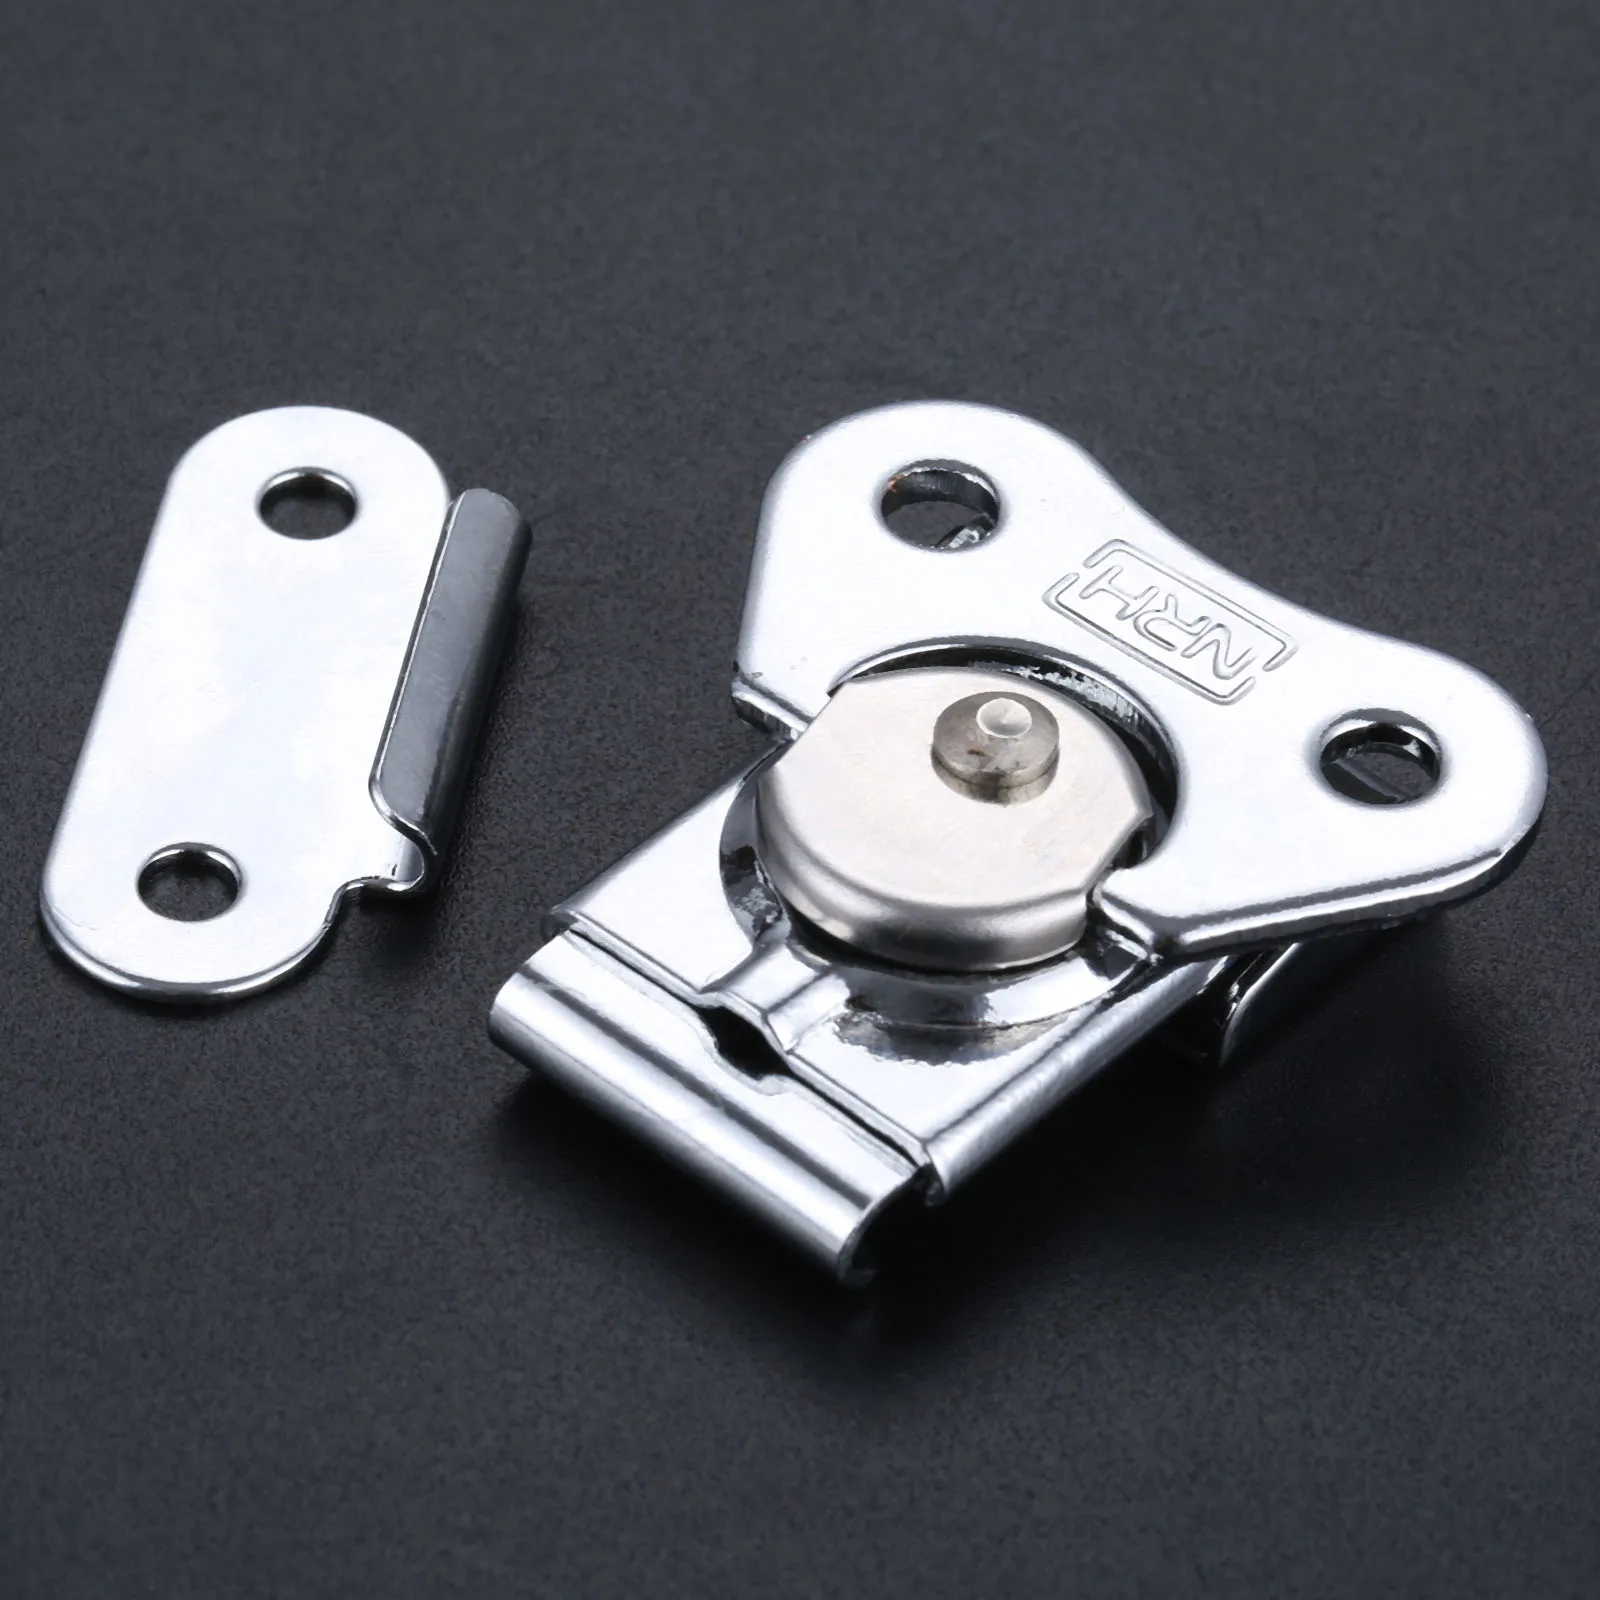 2pcs/set Stainless Steel Butterfly Toggle Latch Catch Clamp Box Buckle Rotary Lock Flight Case 52*38mm Baggage Accessories